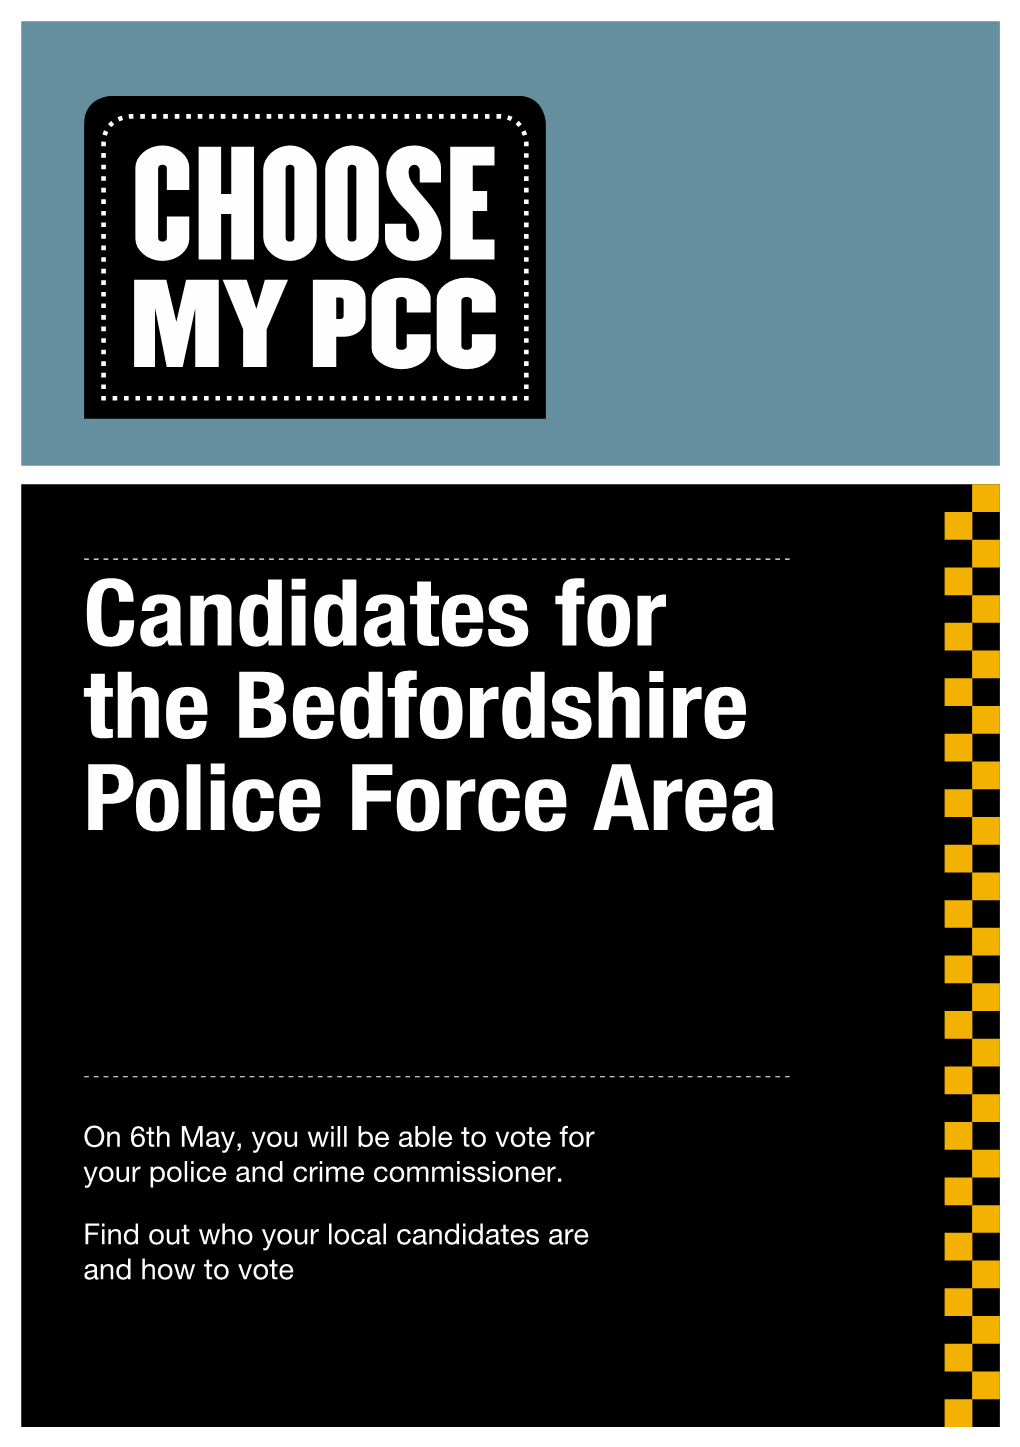 Candidates for the Bedfordshire Police Force Area